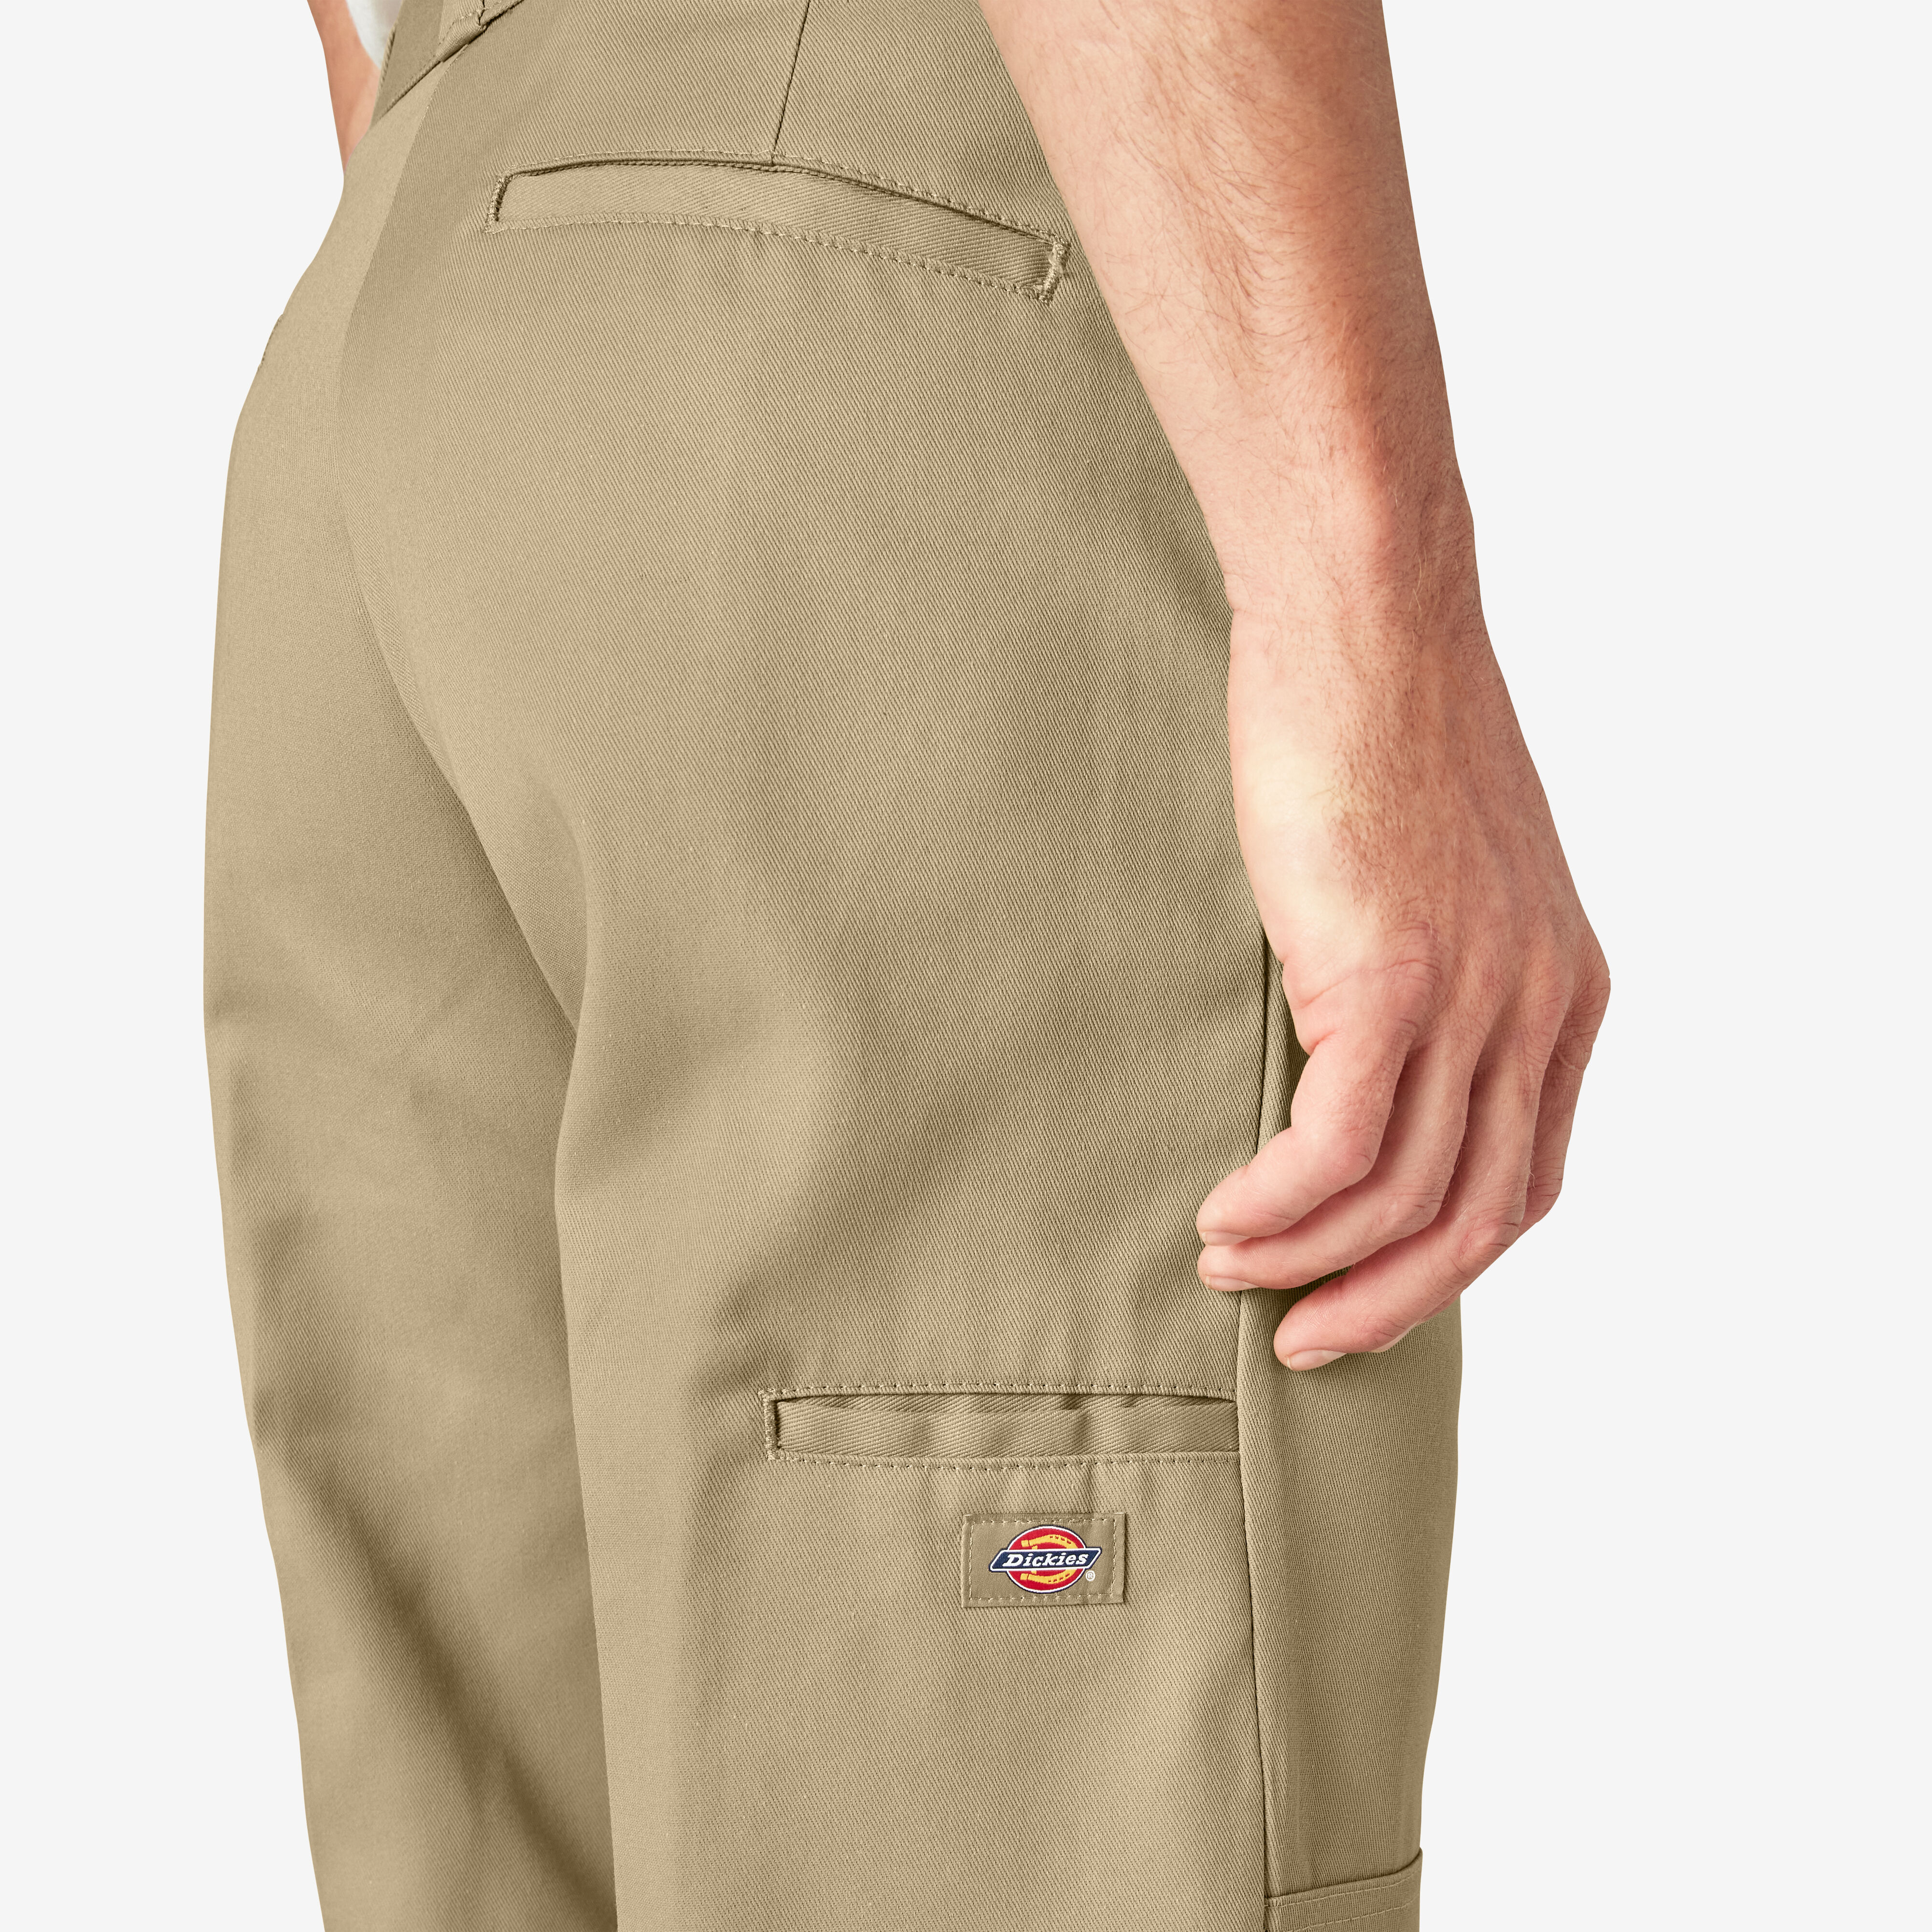 Men's Fire Hose Fleece-Lined Relaxed Fit Pants | Duluth Trading Company